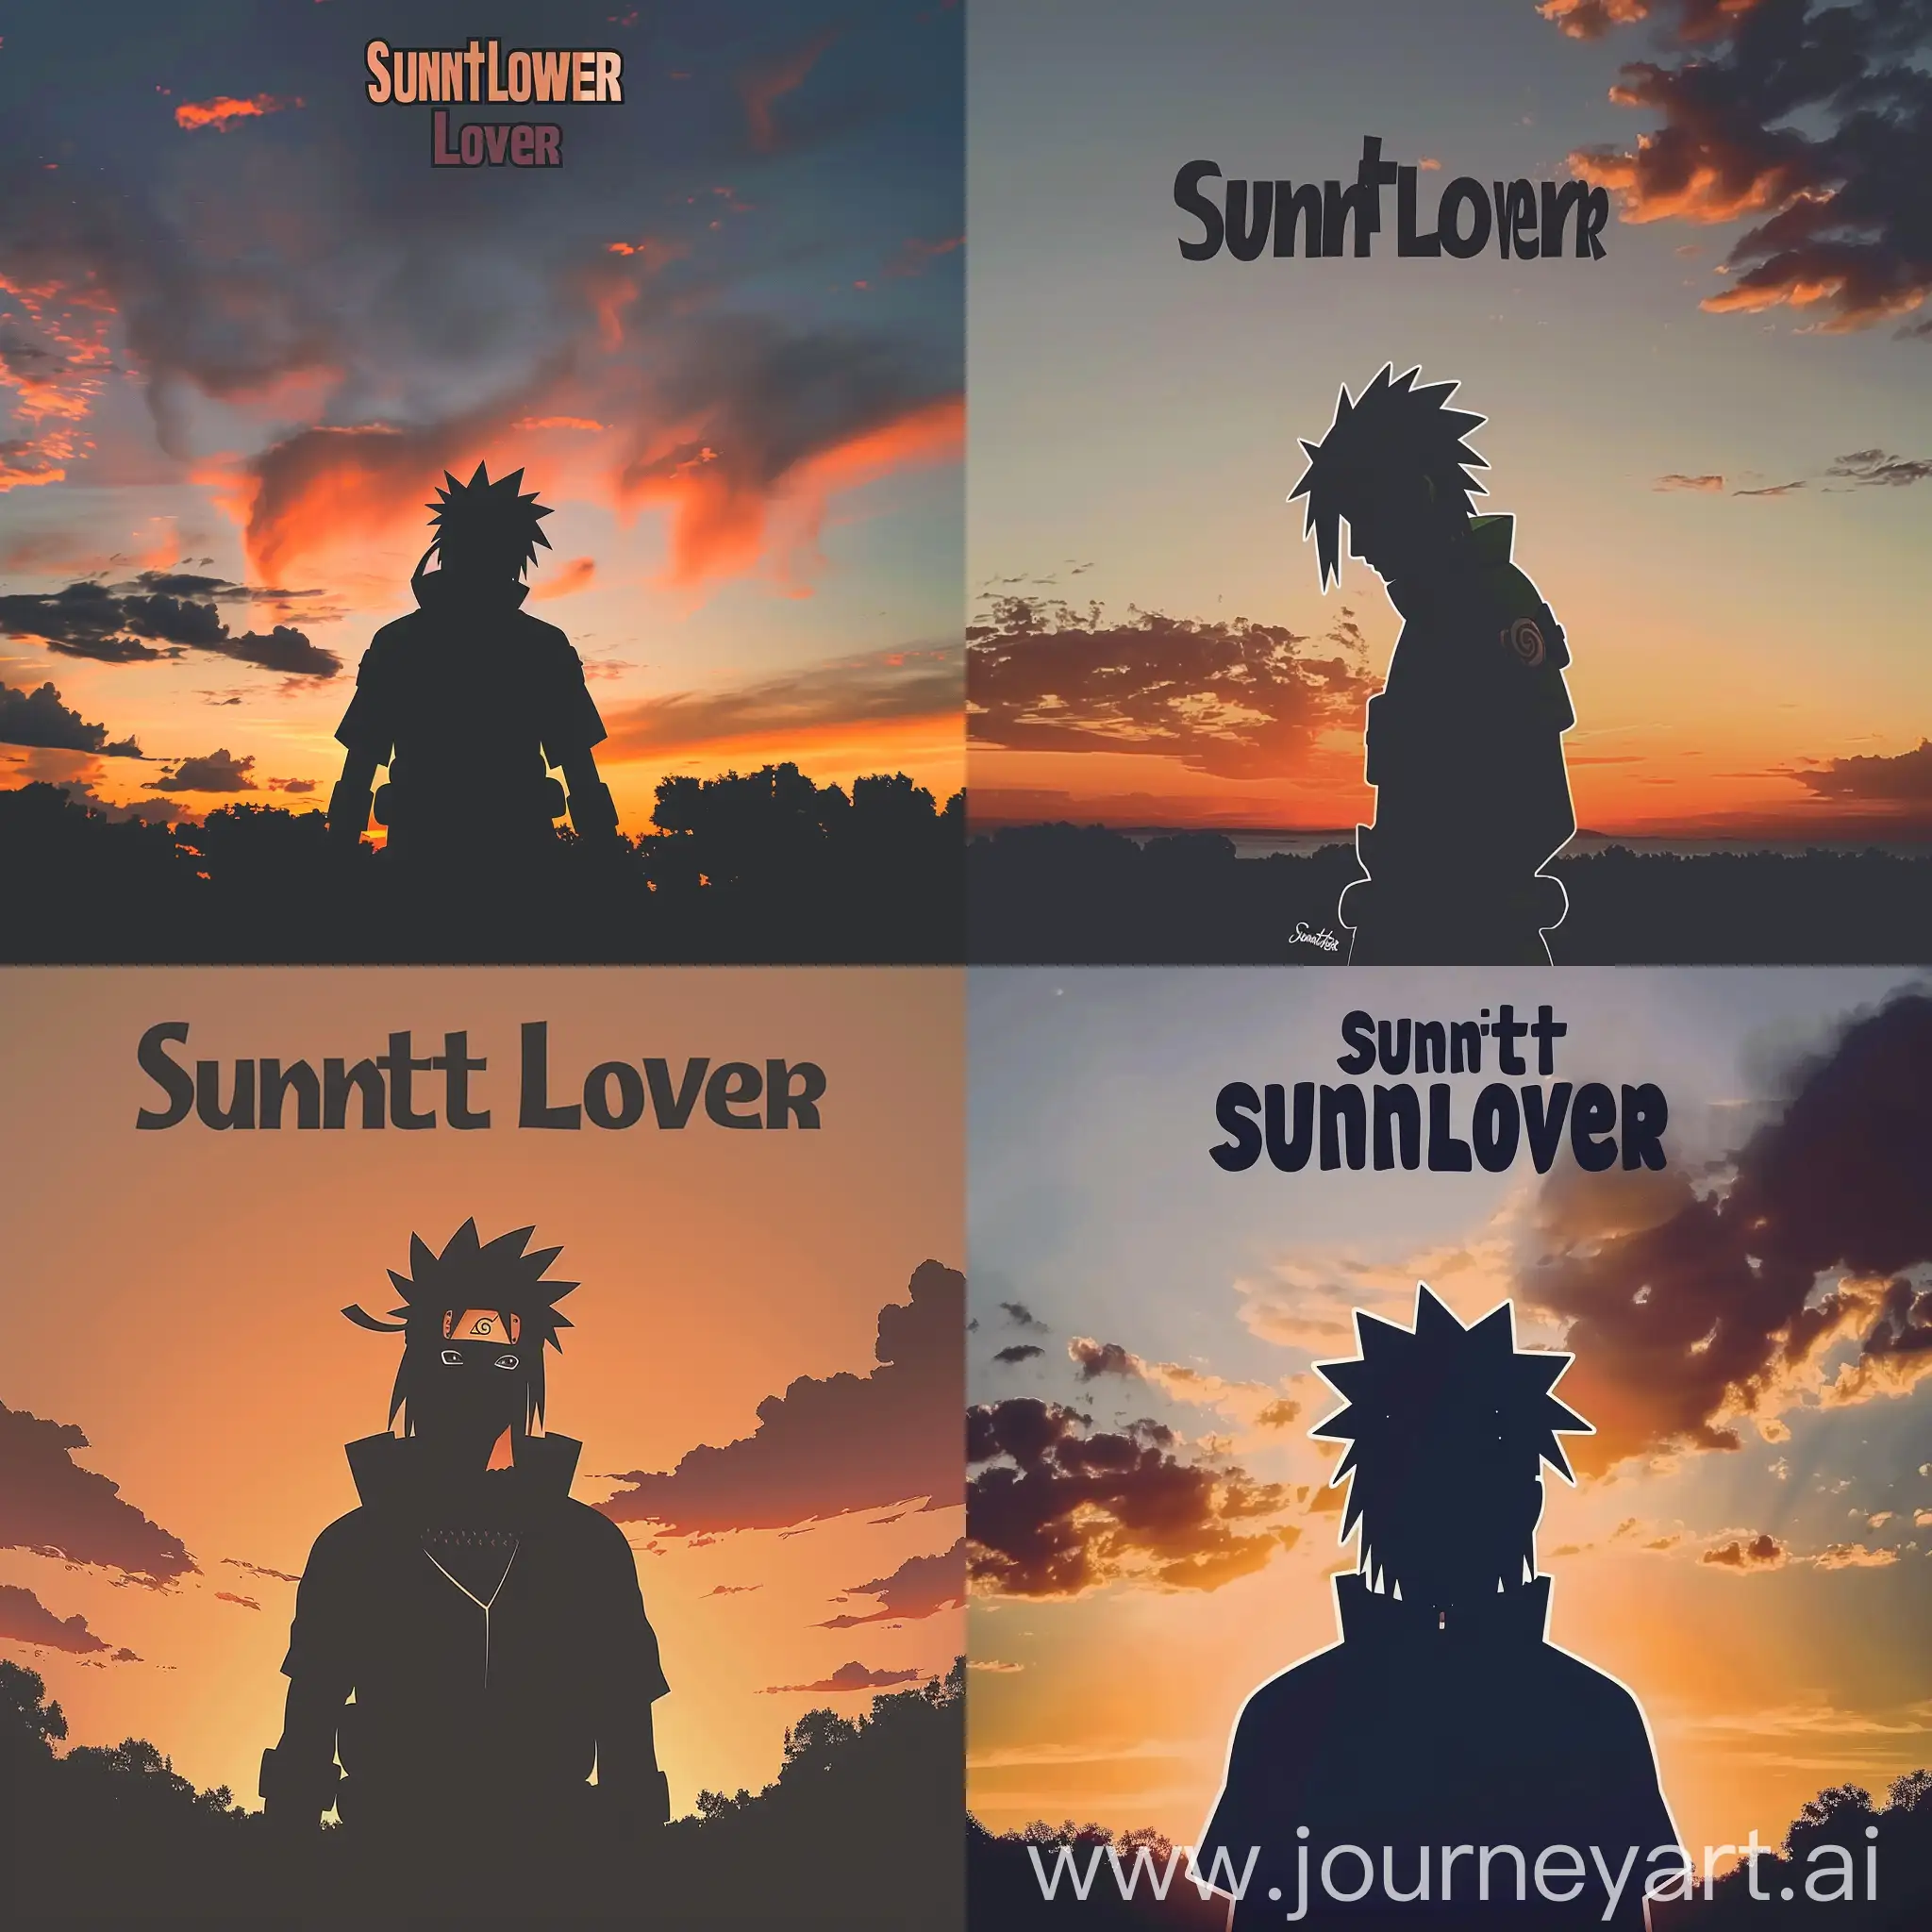 https://i.postimg.cc/nrByhnRM/In-Shot-20240306-184113924.jpg Silhouette of a Minato from the anime naruto against a sunset sky with the text \"Sunset Lover\" in the upper half of the image